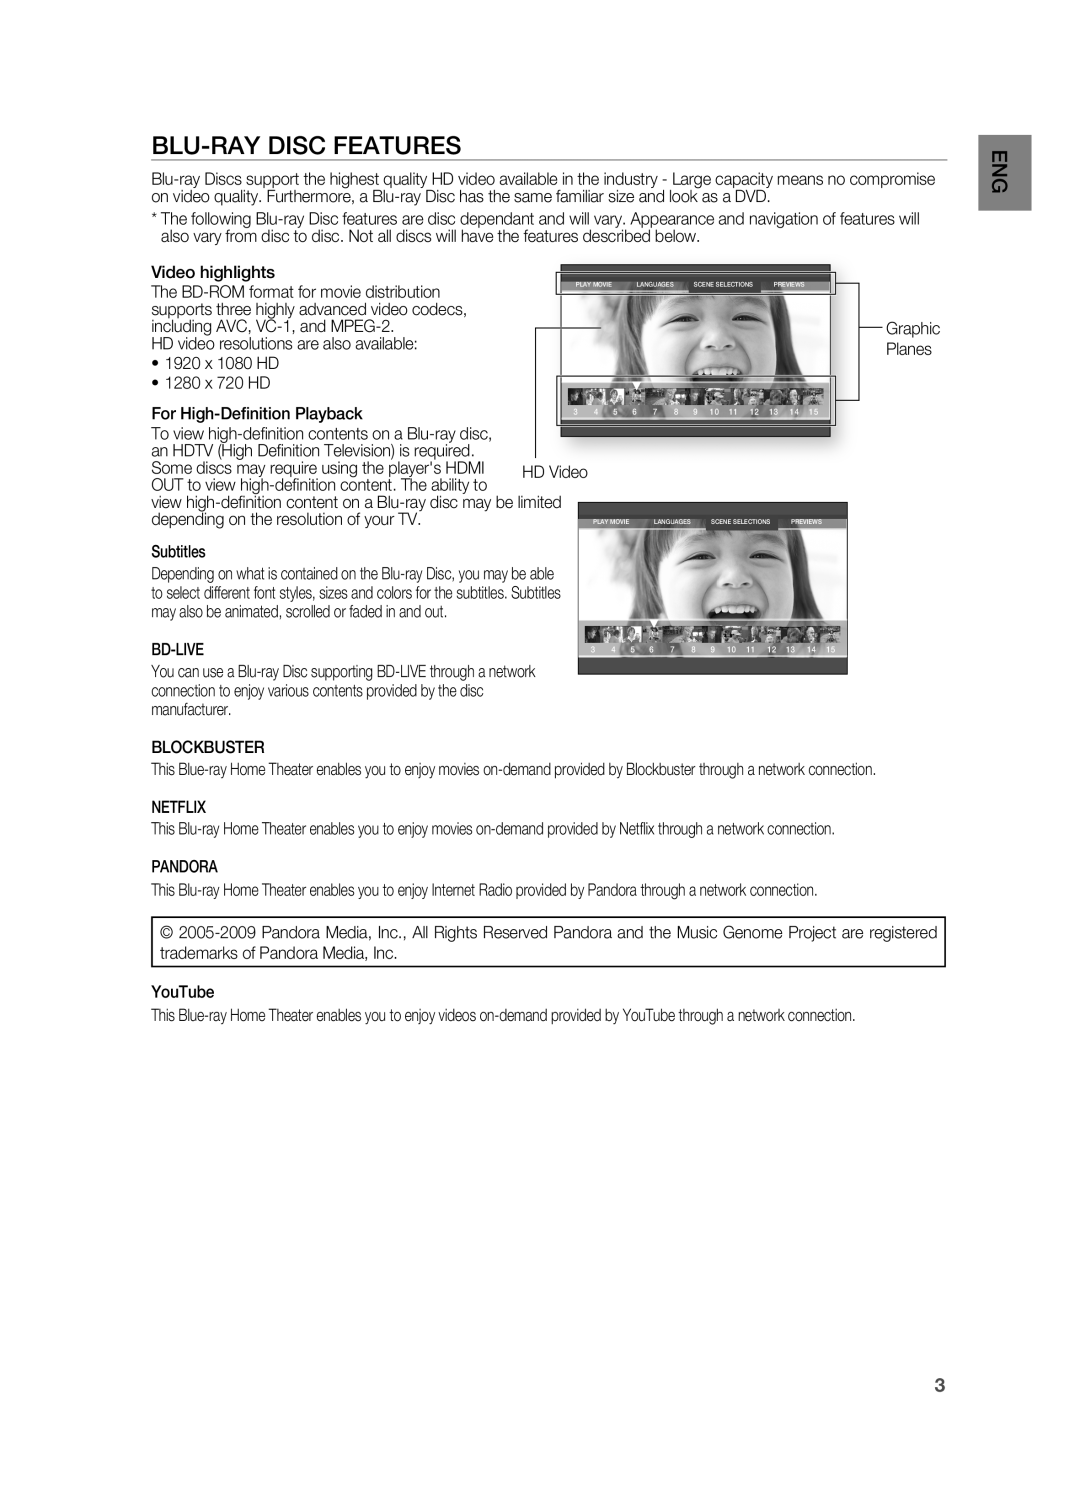 Samsung HT-BD8200 user manual Blu-Raydisc Features, Bd-Live 